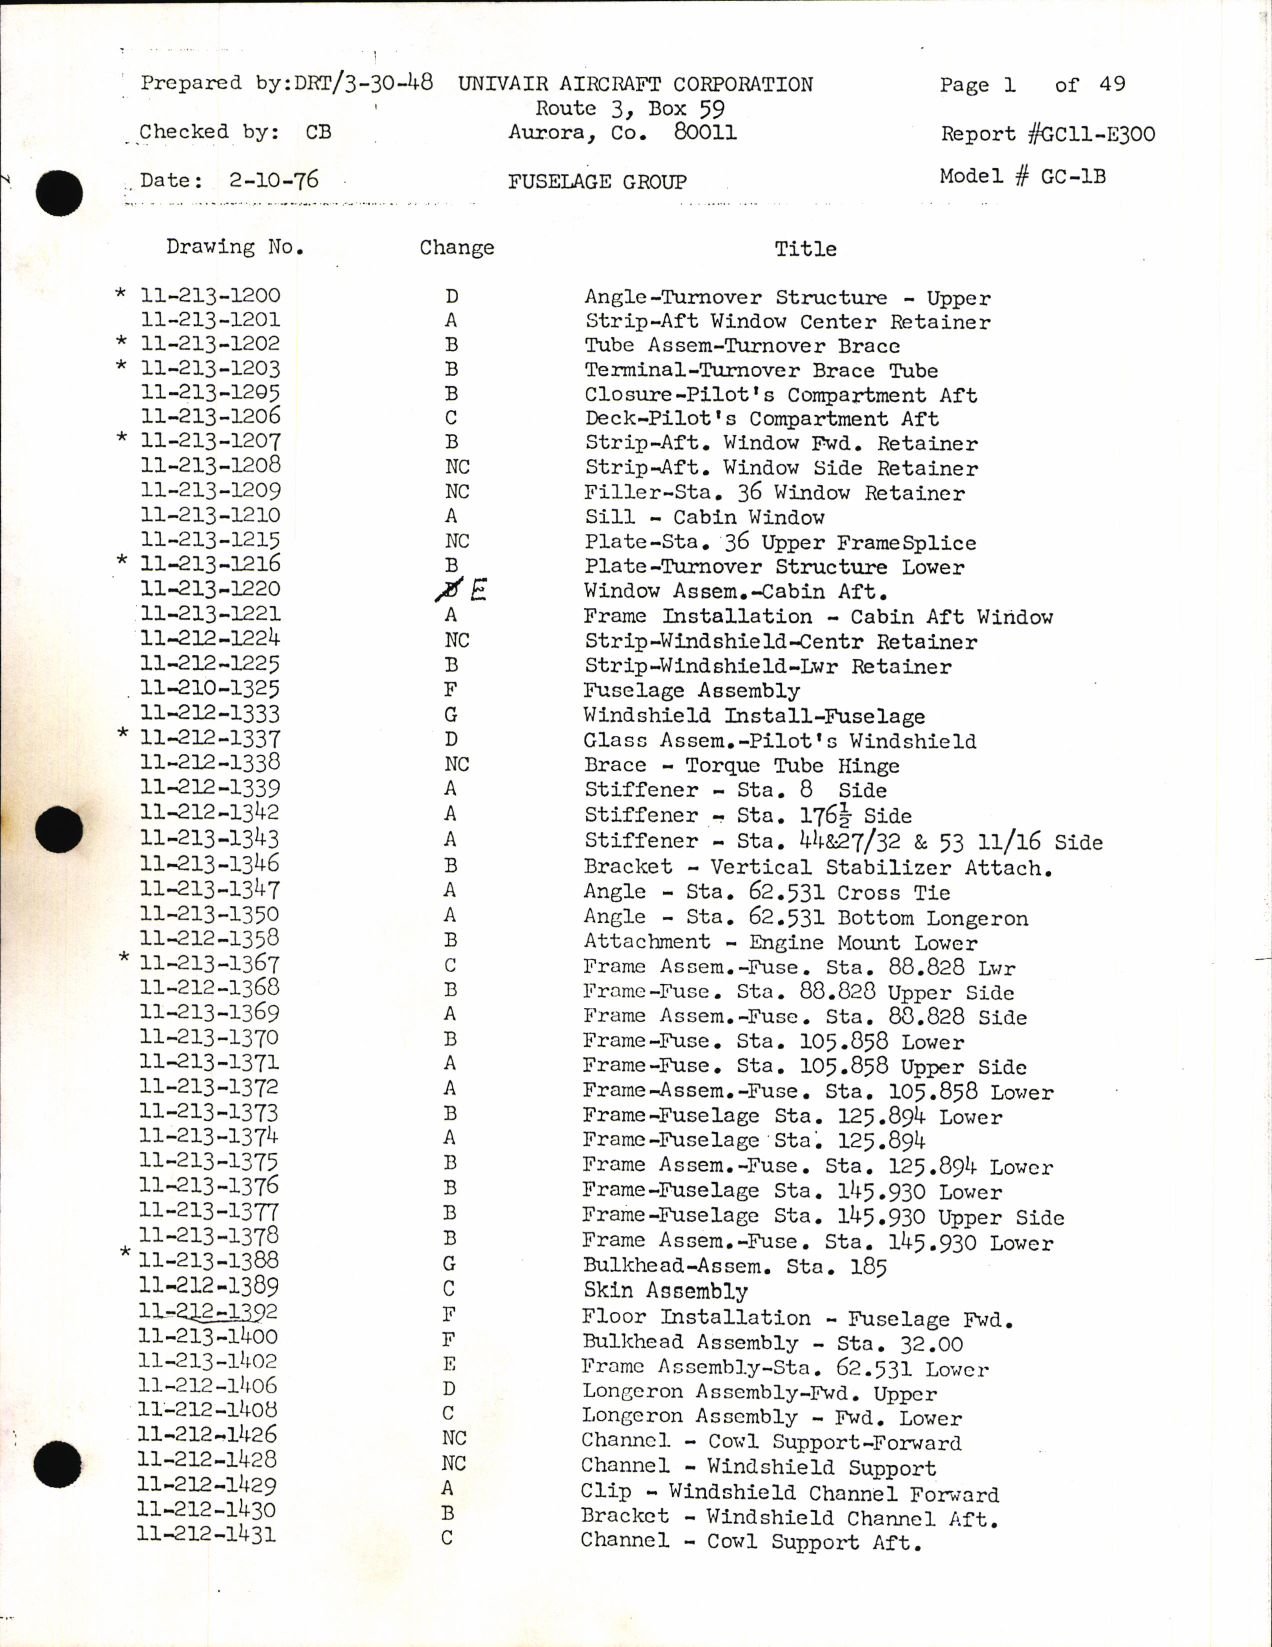 Sample page 6 from AirCorps Library document: Univair Aircraft Corporation Drawing List